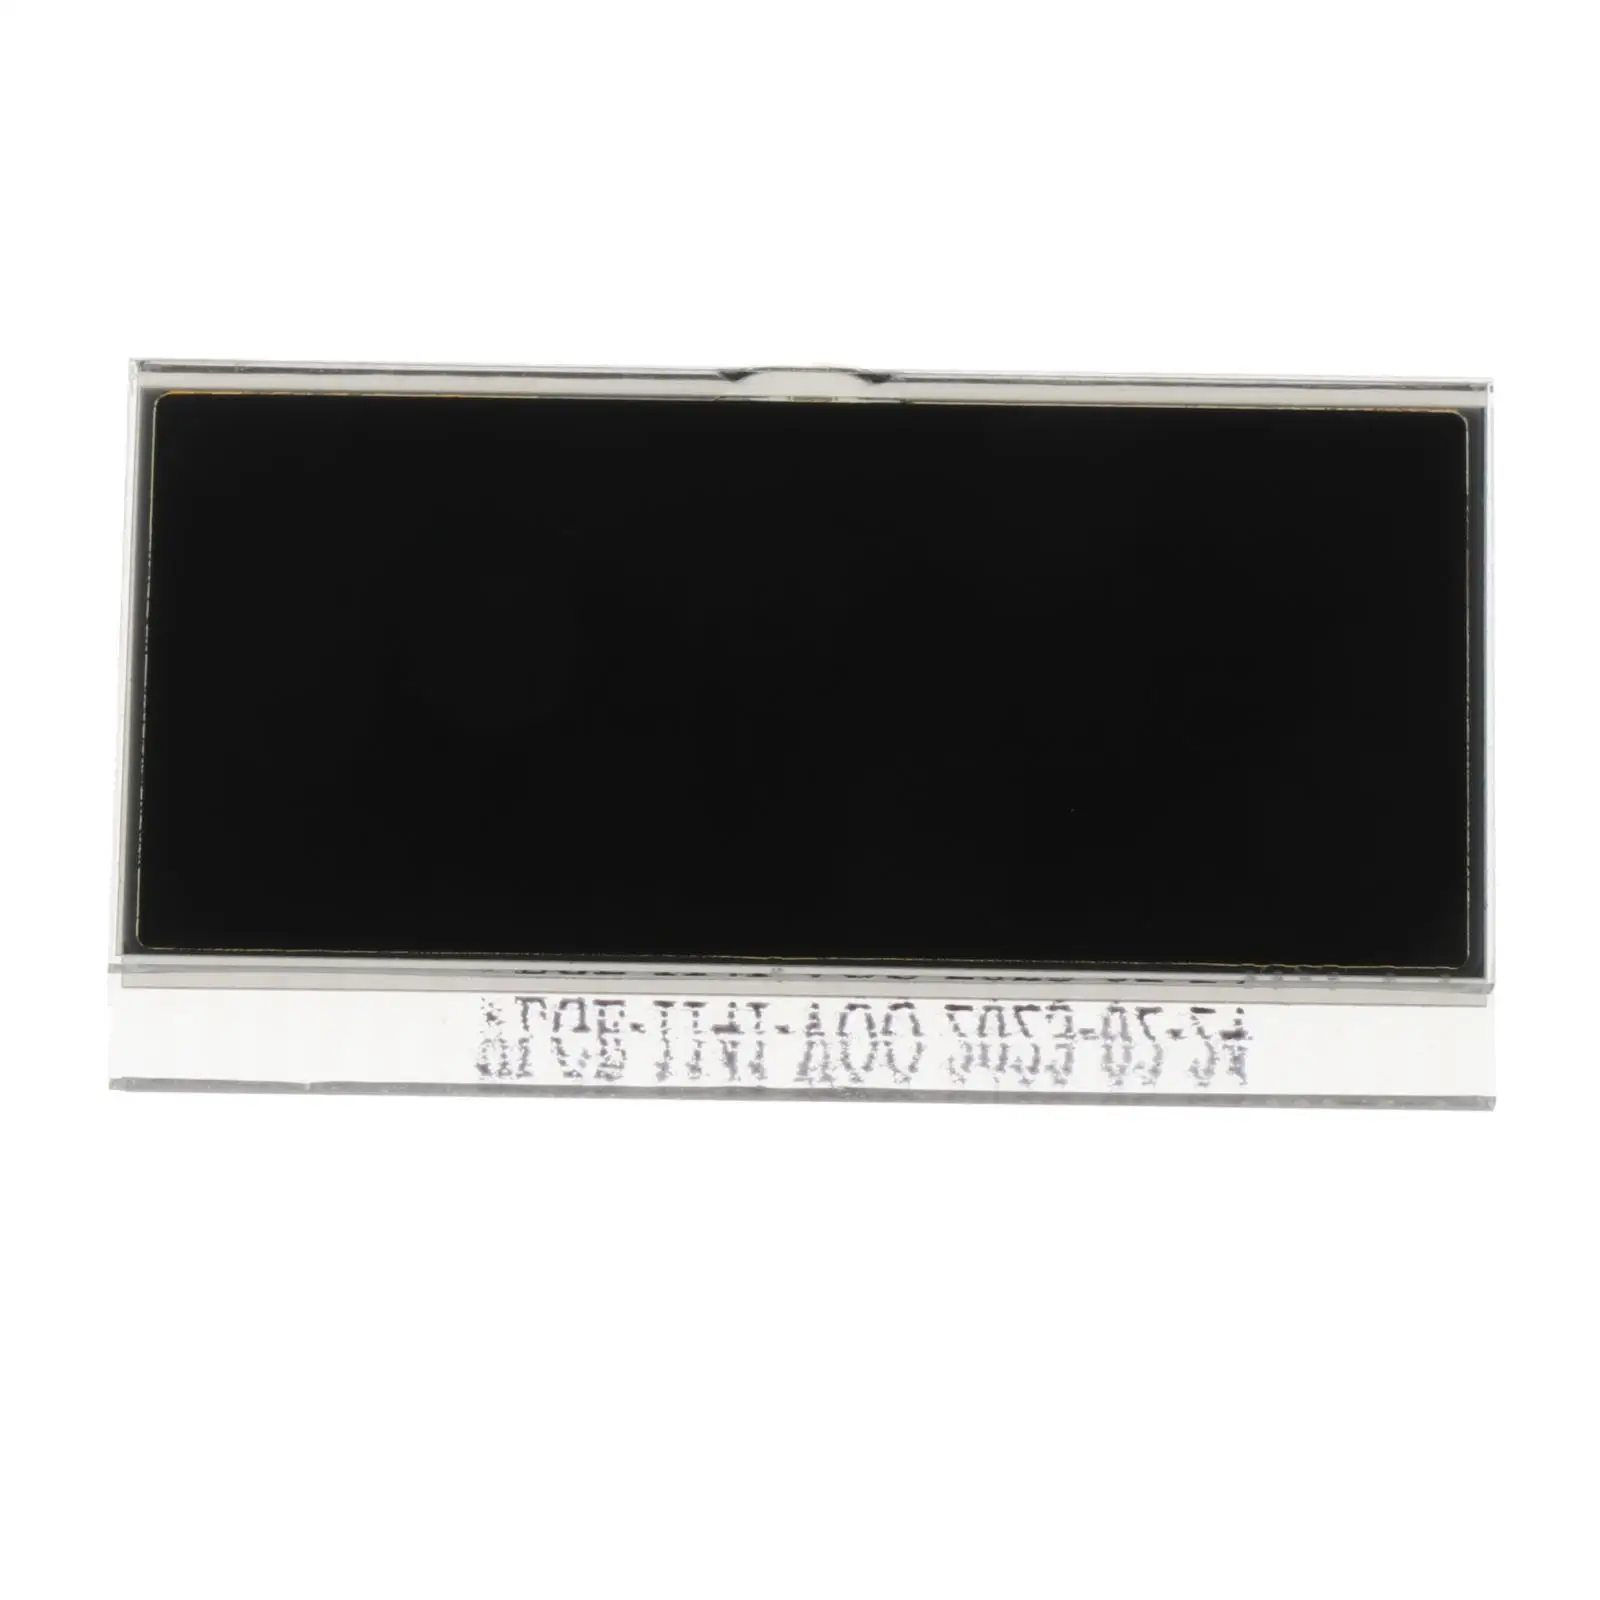 LCD Display Screen Air Conditioning Pixel Repair Professional Replace Parts High Performance for Audi A6 4F Q7 4L Accessory